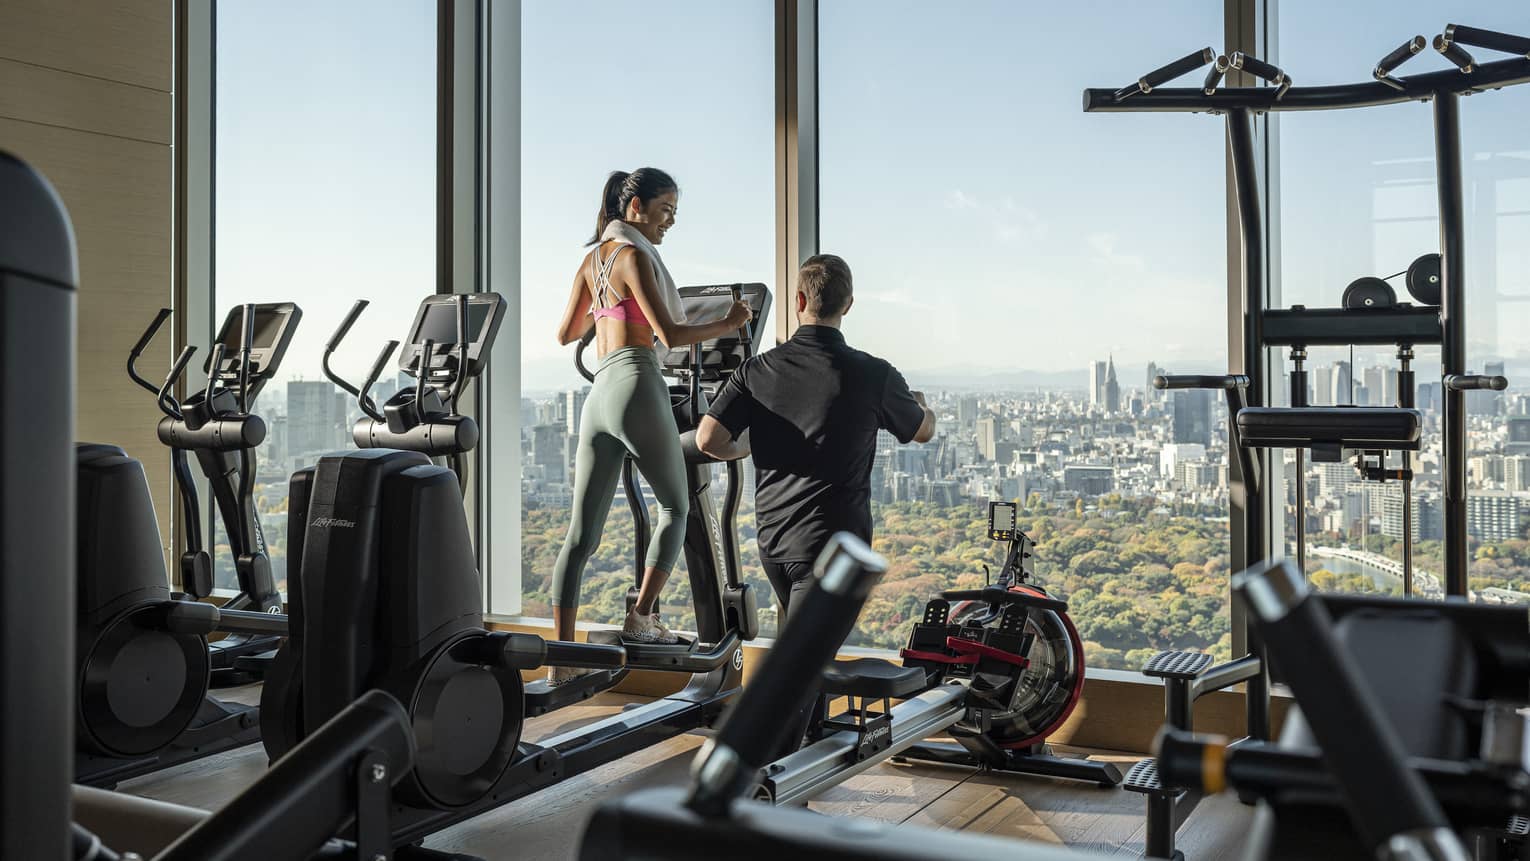 Woman trains on treadmill with male trainer, overlooking downtown Tokyo